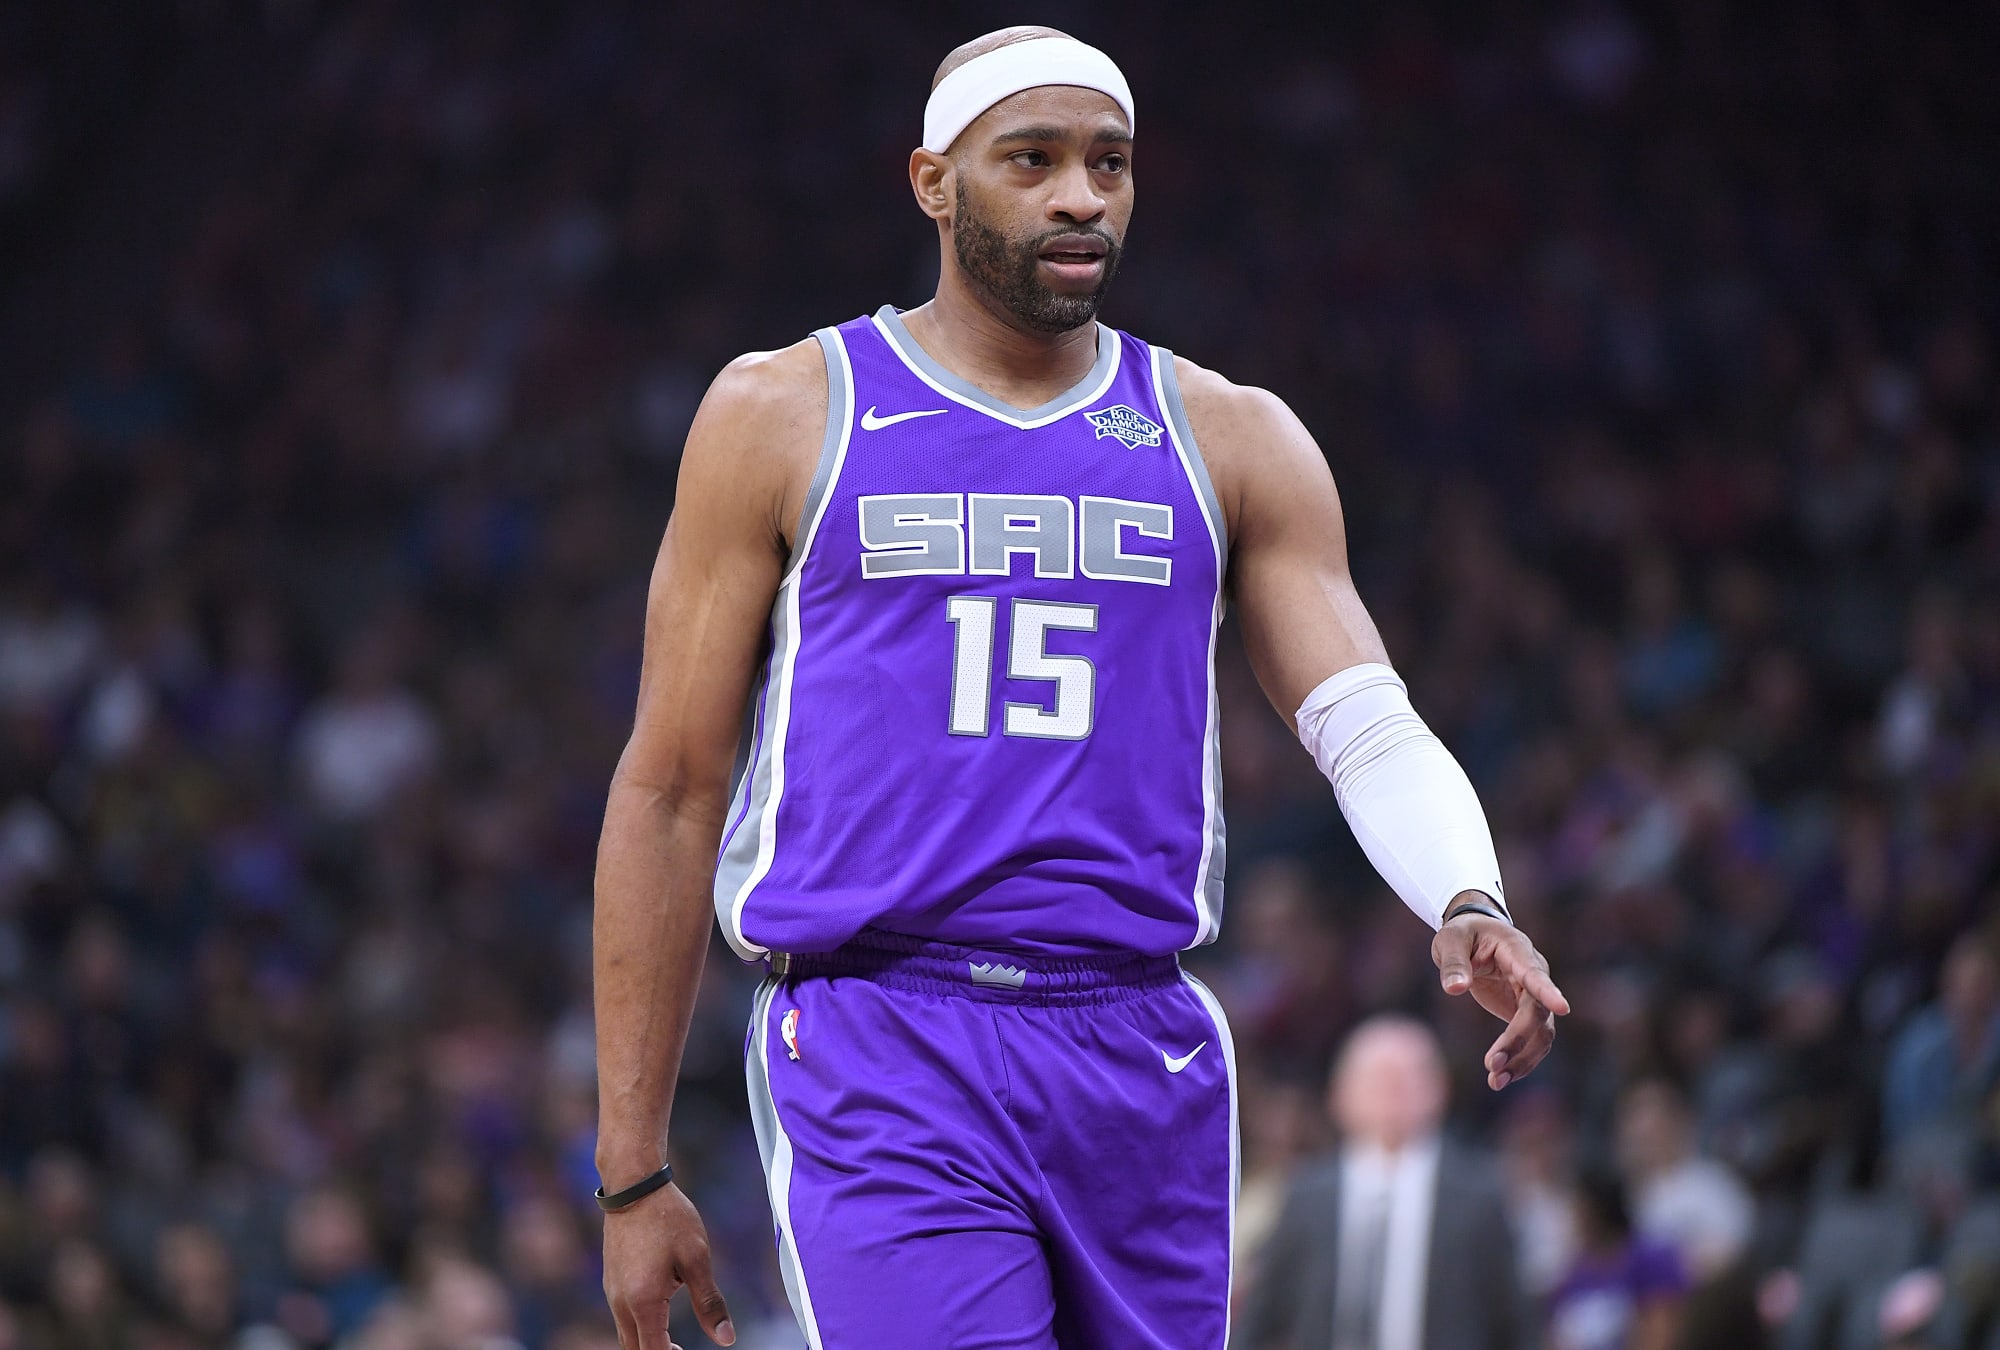 Vince Carter: Happy Birthday to the future Hall of Famer